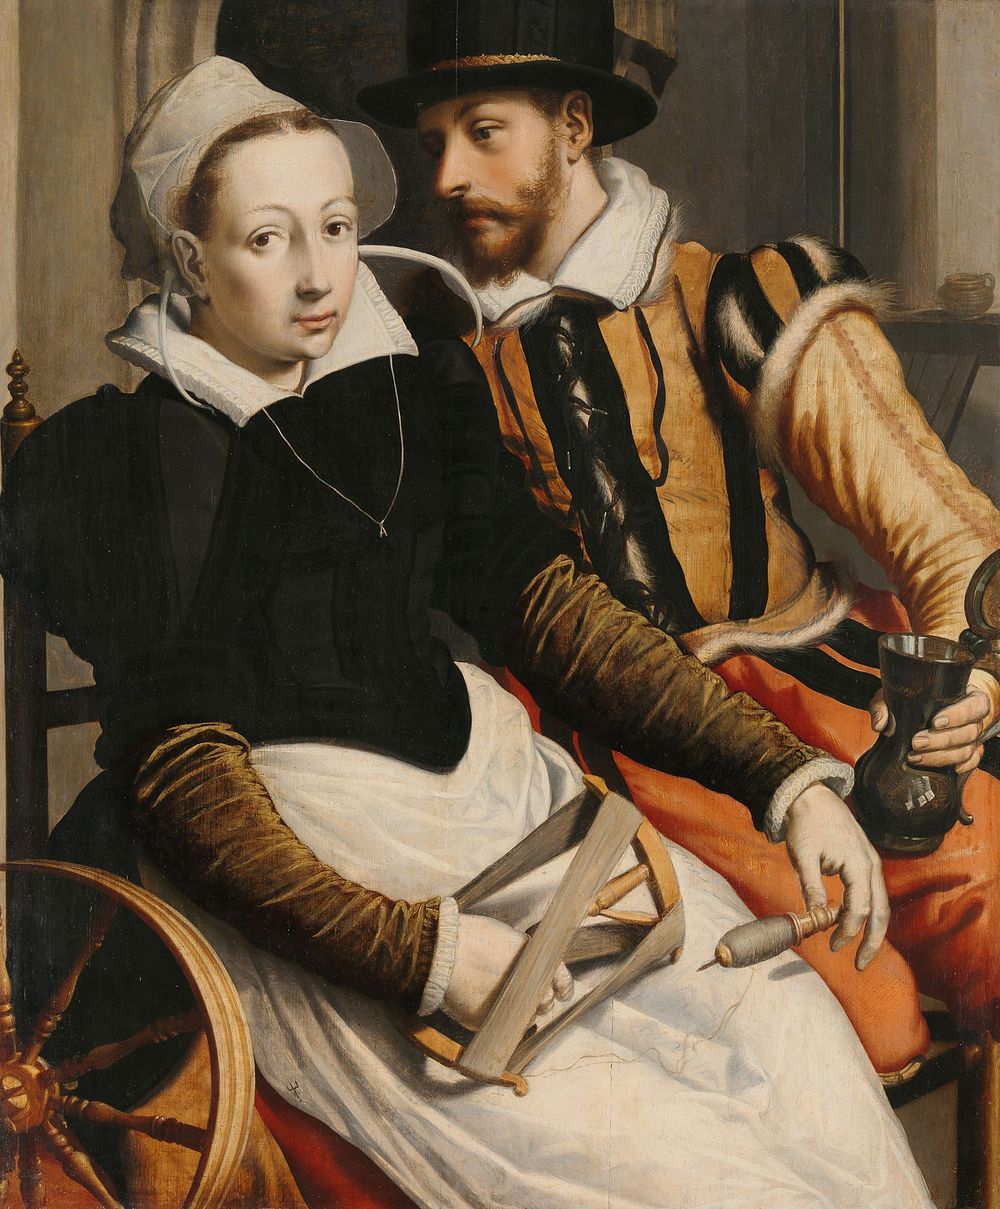 Man and Woman at a Spinning Wheel (c. 1560 - c. 1570) by Pieter Pietersz  I